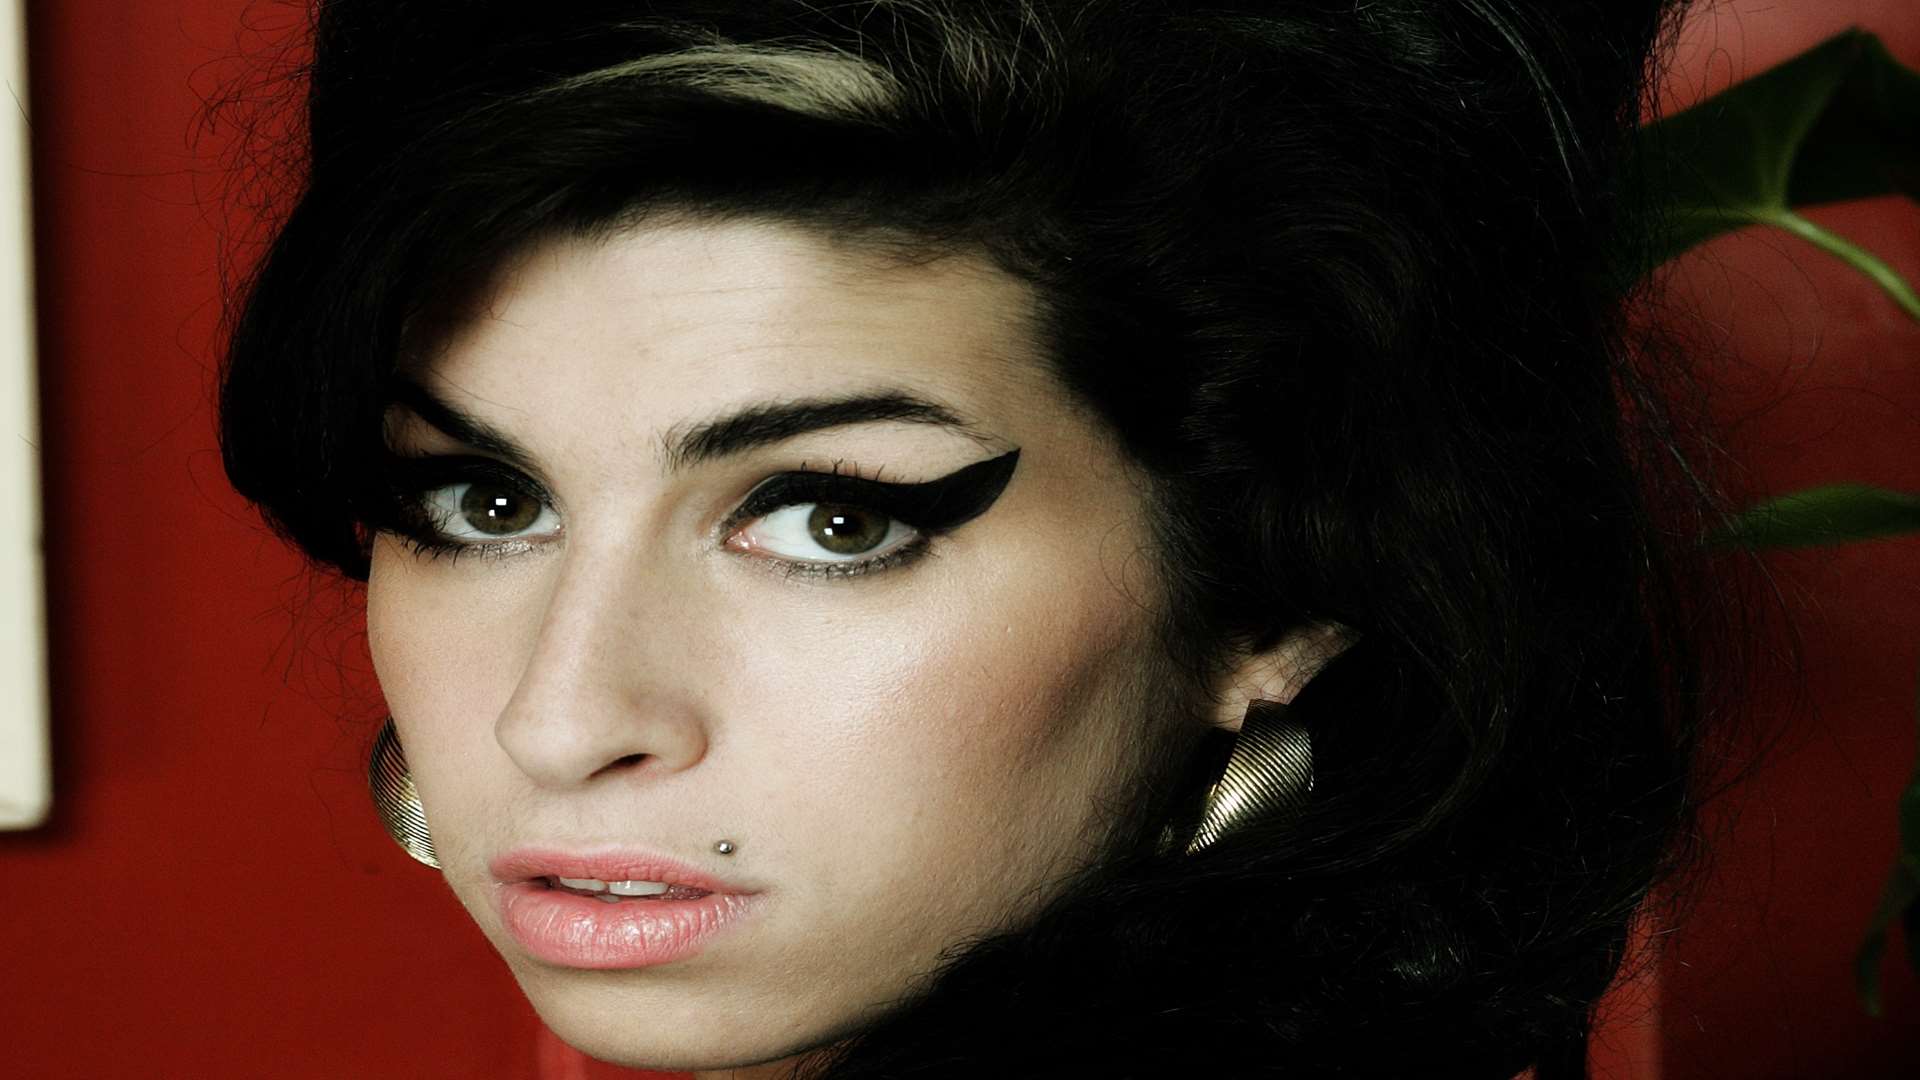 Amy Winehouse died as a result of alcohol poisoning in July 2011